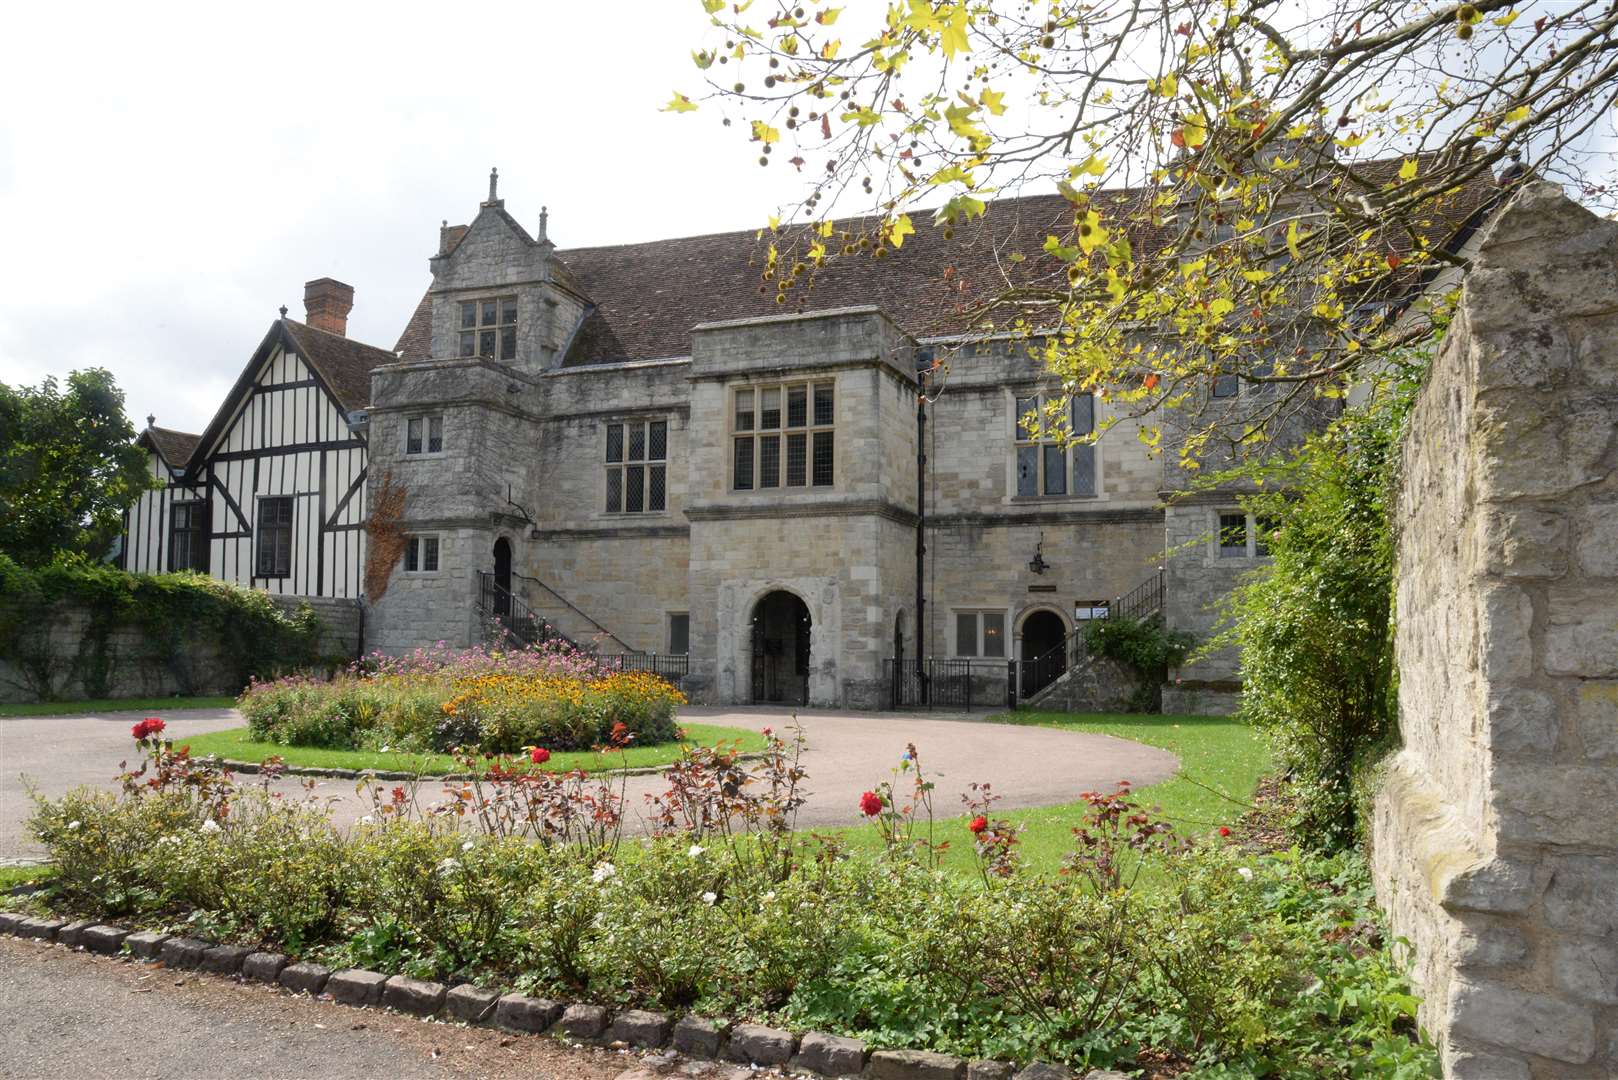 The inquest was heard at the Archbishop's Palace in Mill Street, Maidstone